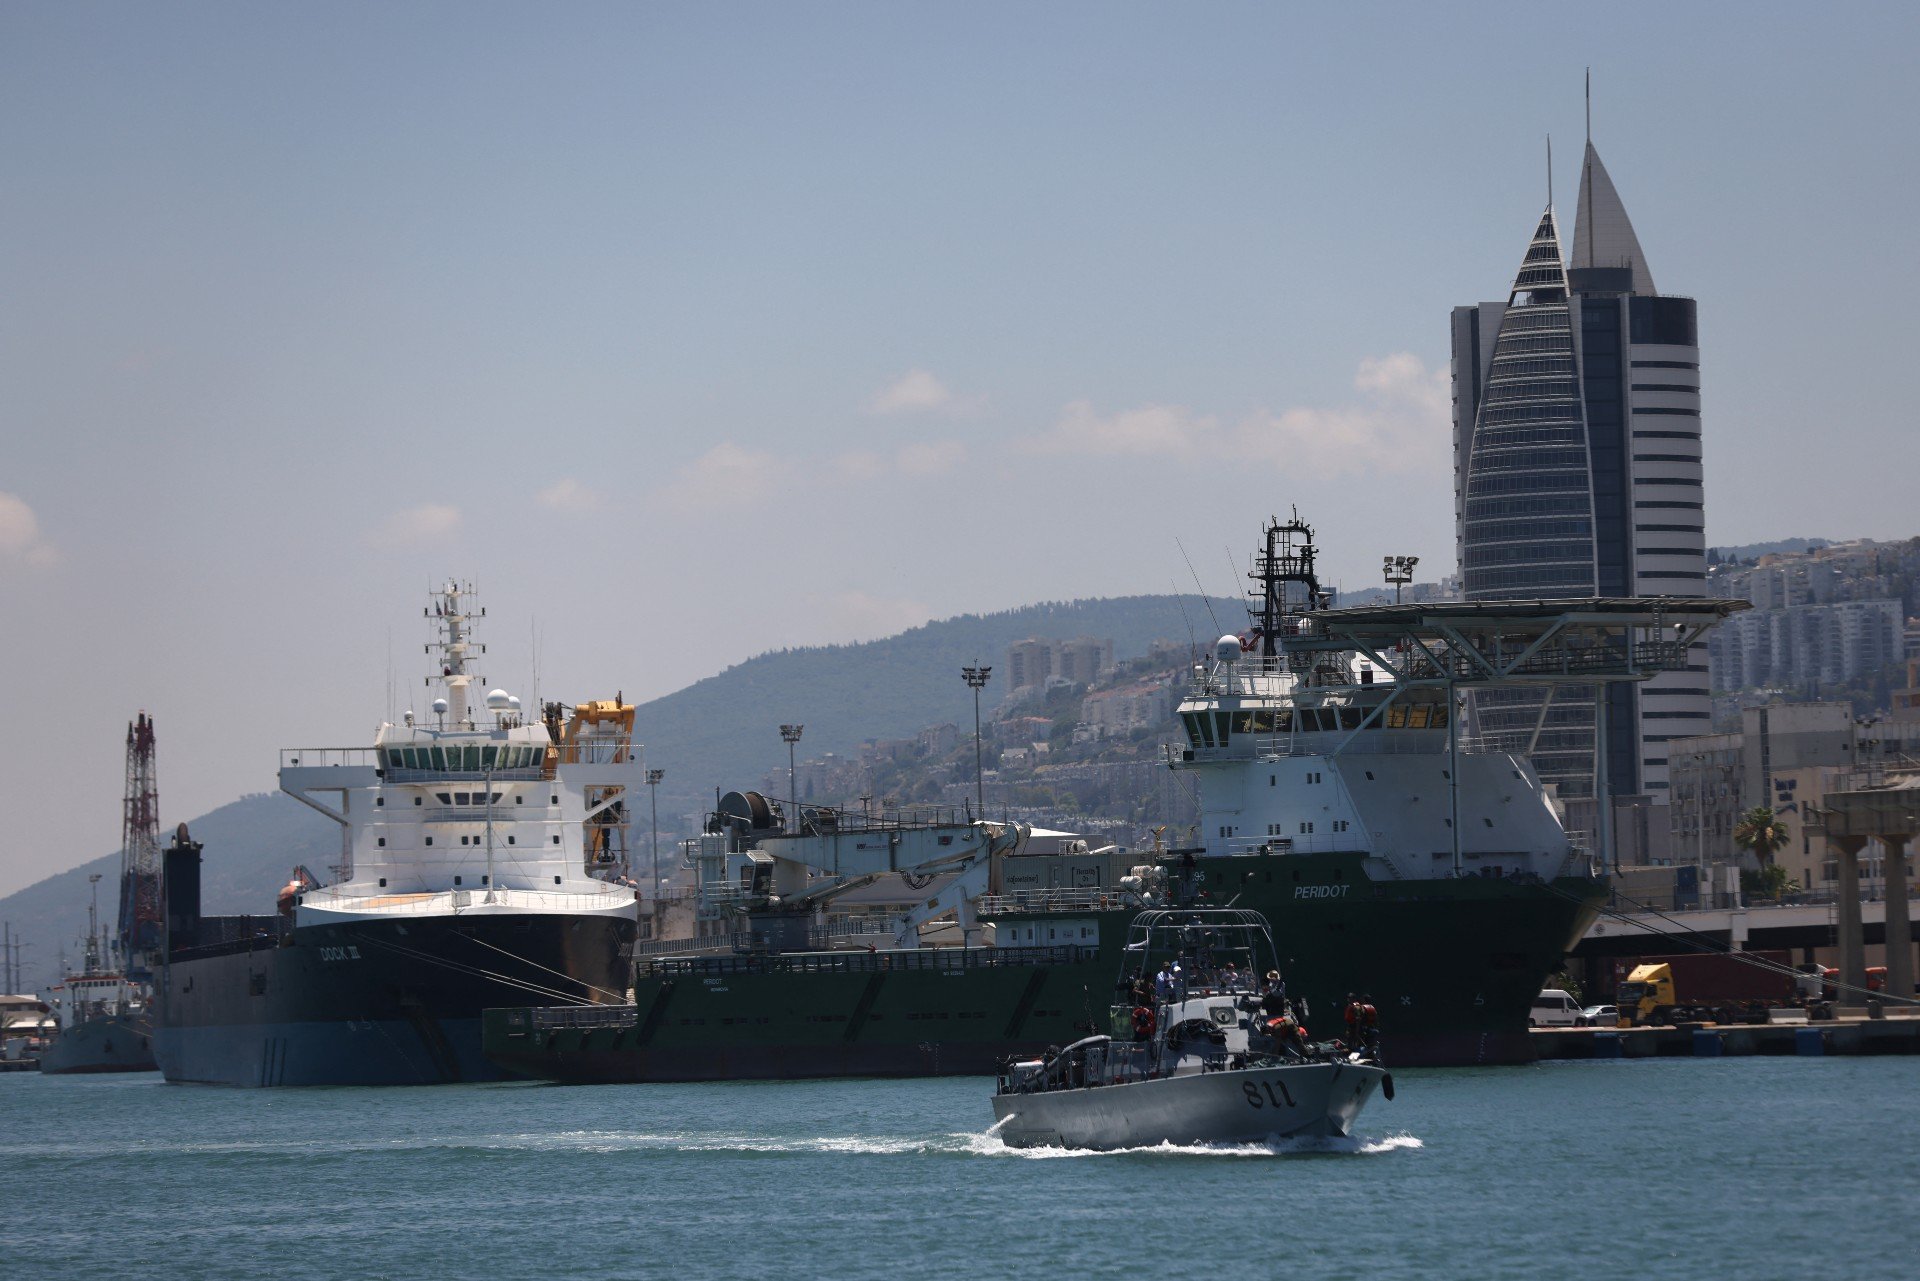 Reuters reported that Haifa's Port had been sold to the Indian company Adani Ports, operating on a joint-bid with Israeli company Gadot